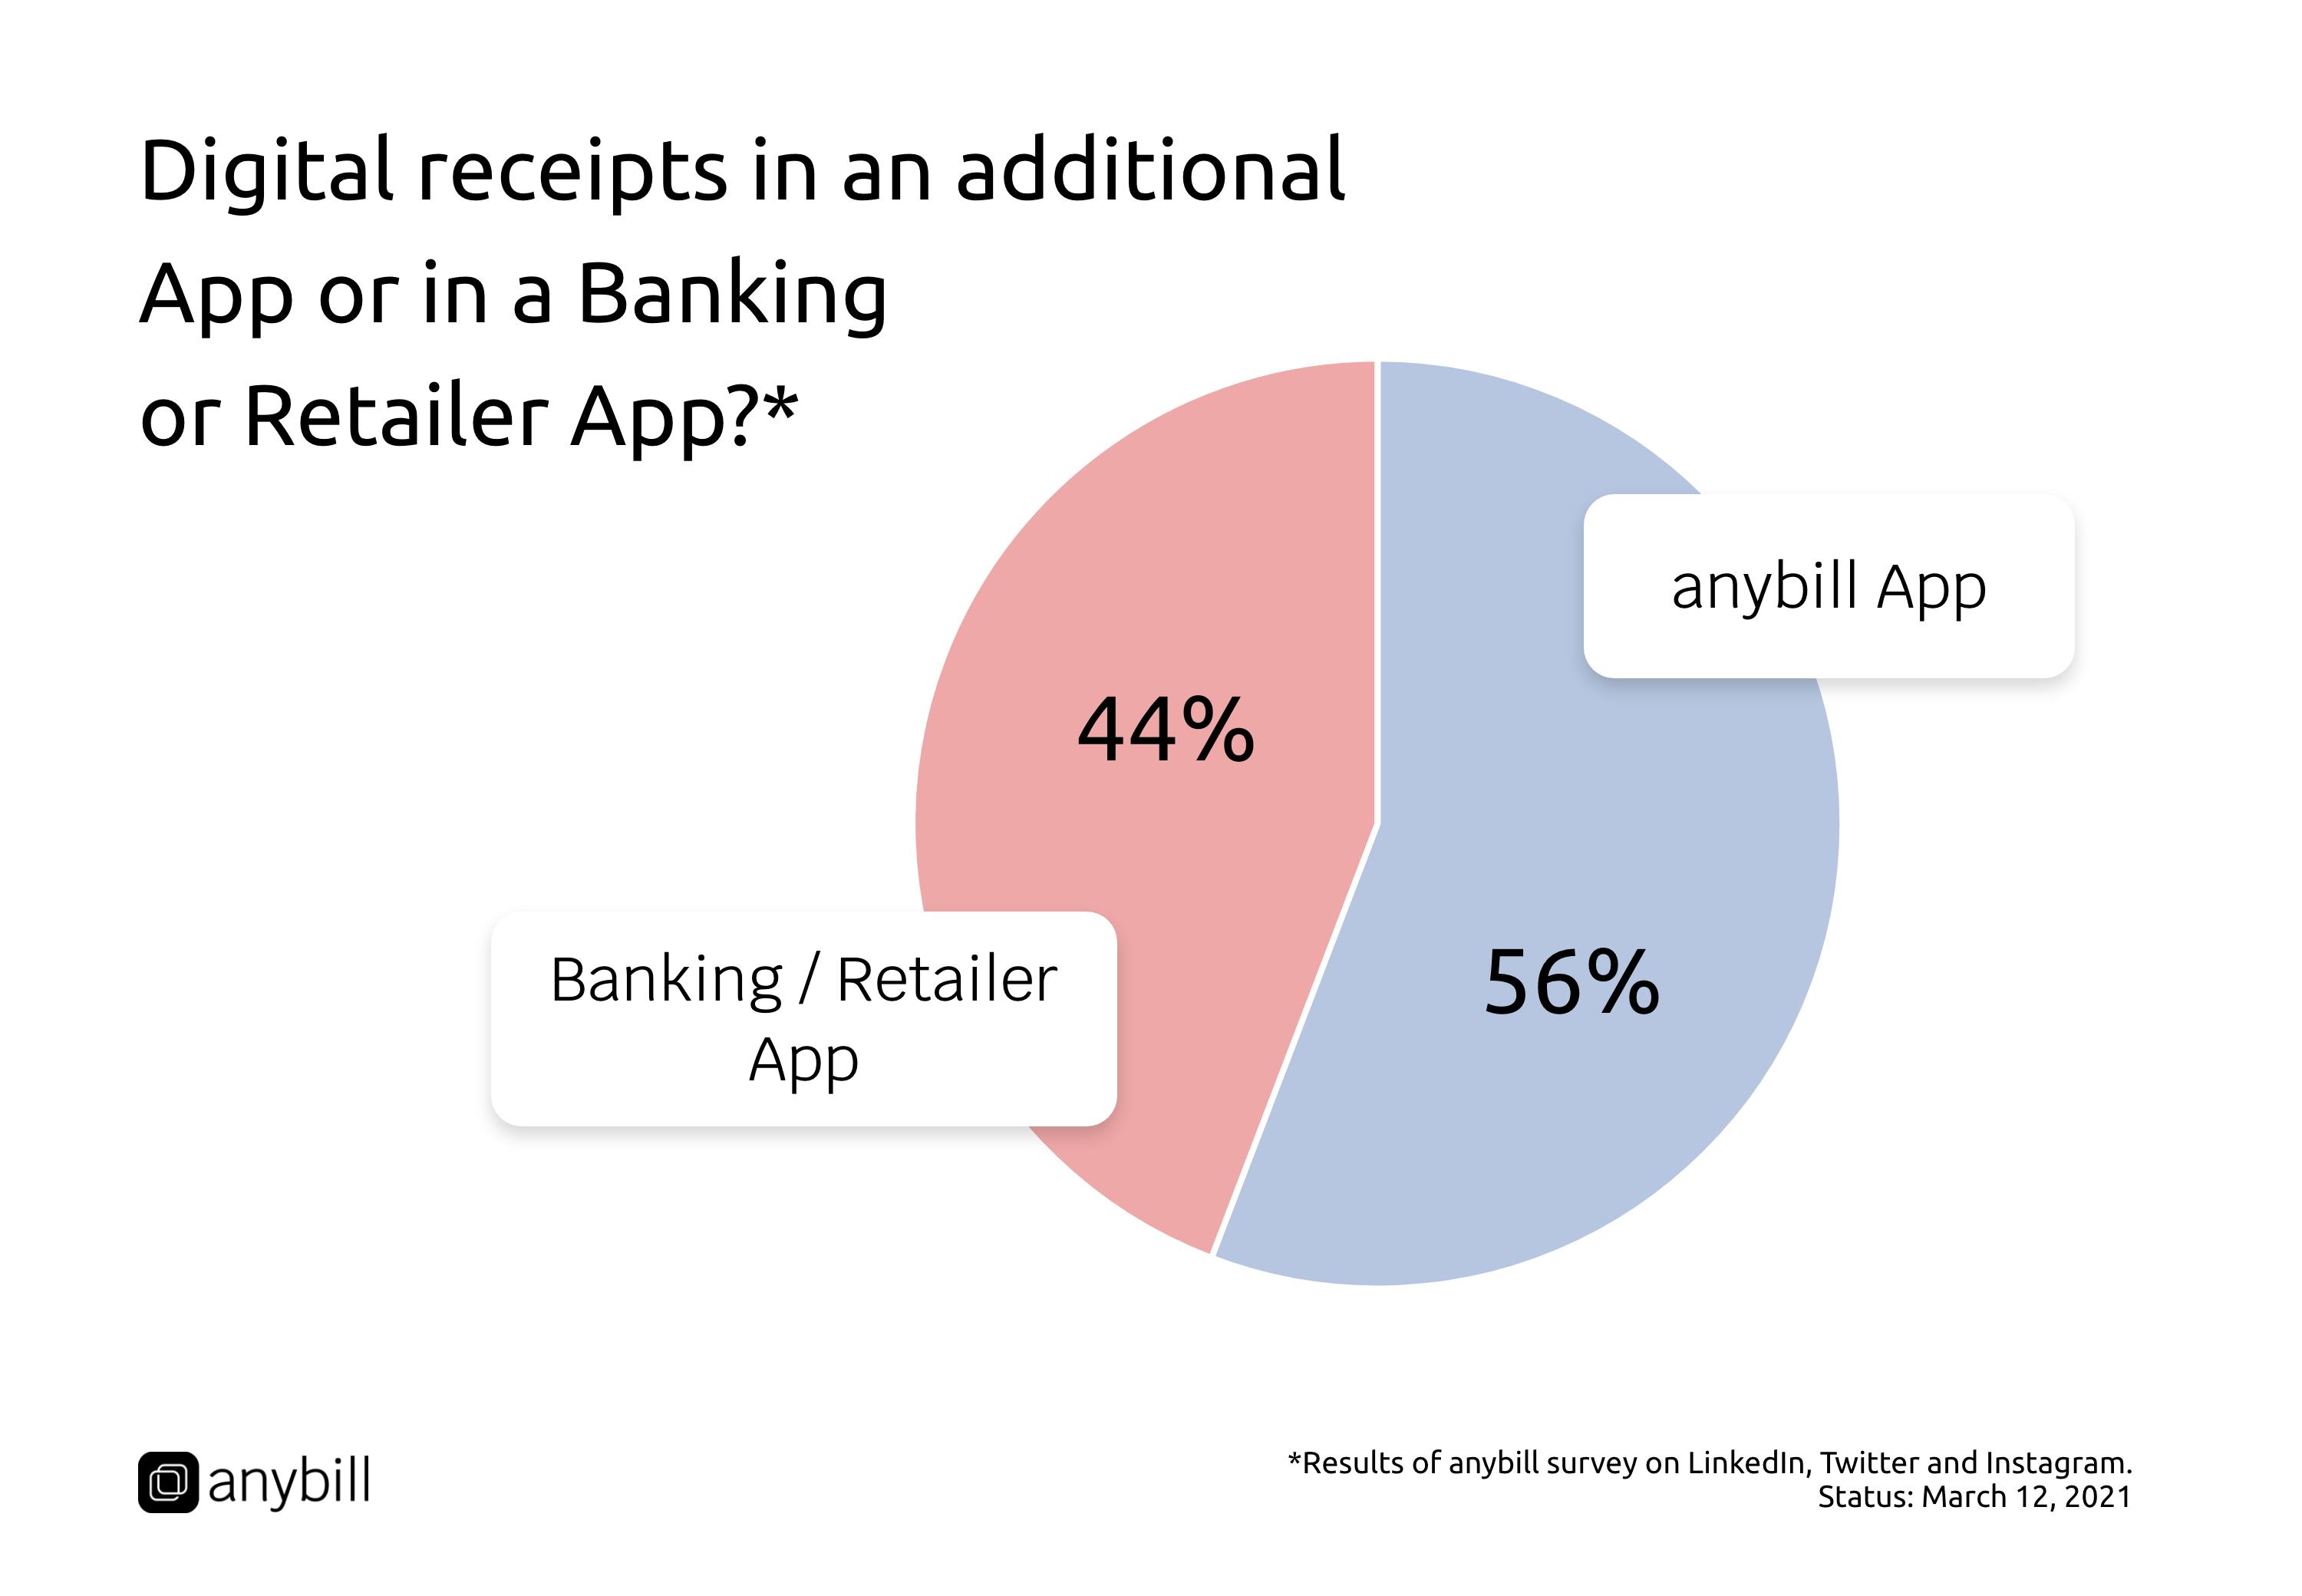 Digital receipts in an additional App or in a Banking or Retailer App?